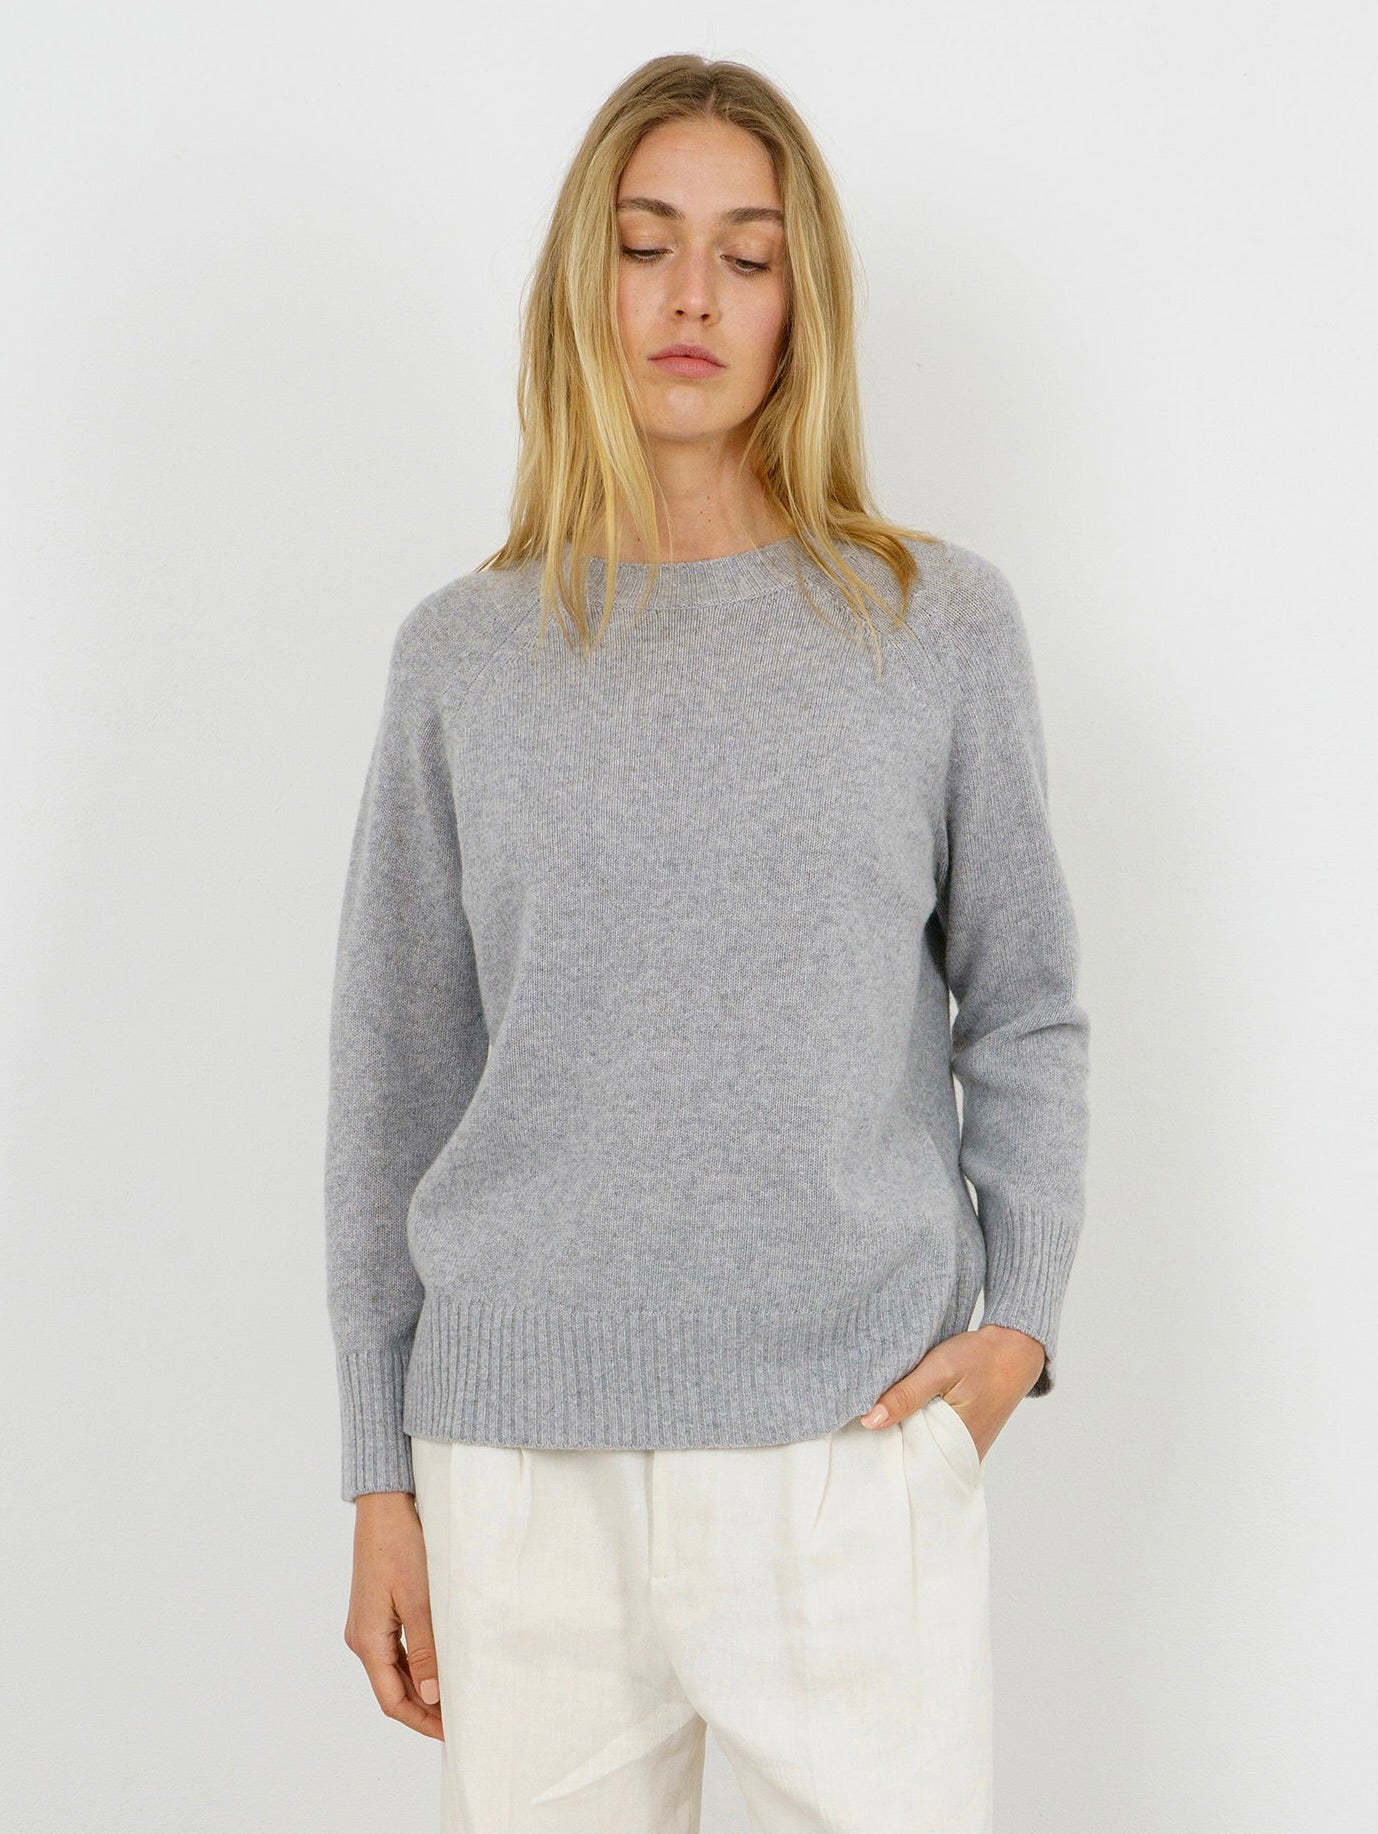 DAISY SWEATER IN OYSTER GREY